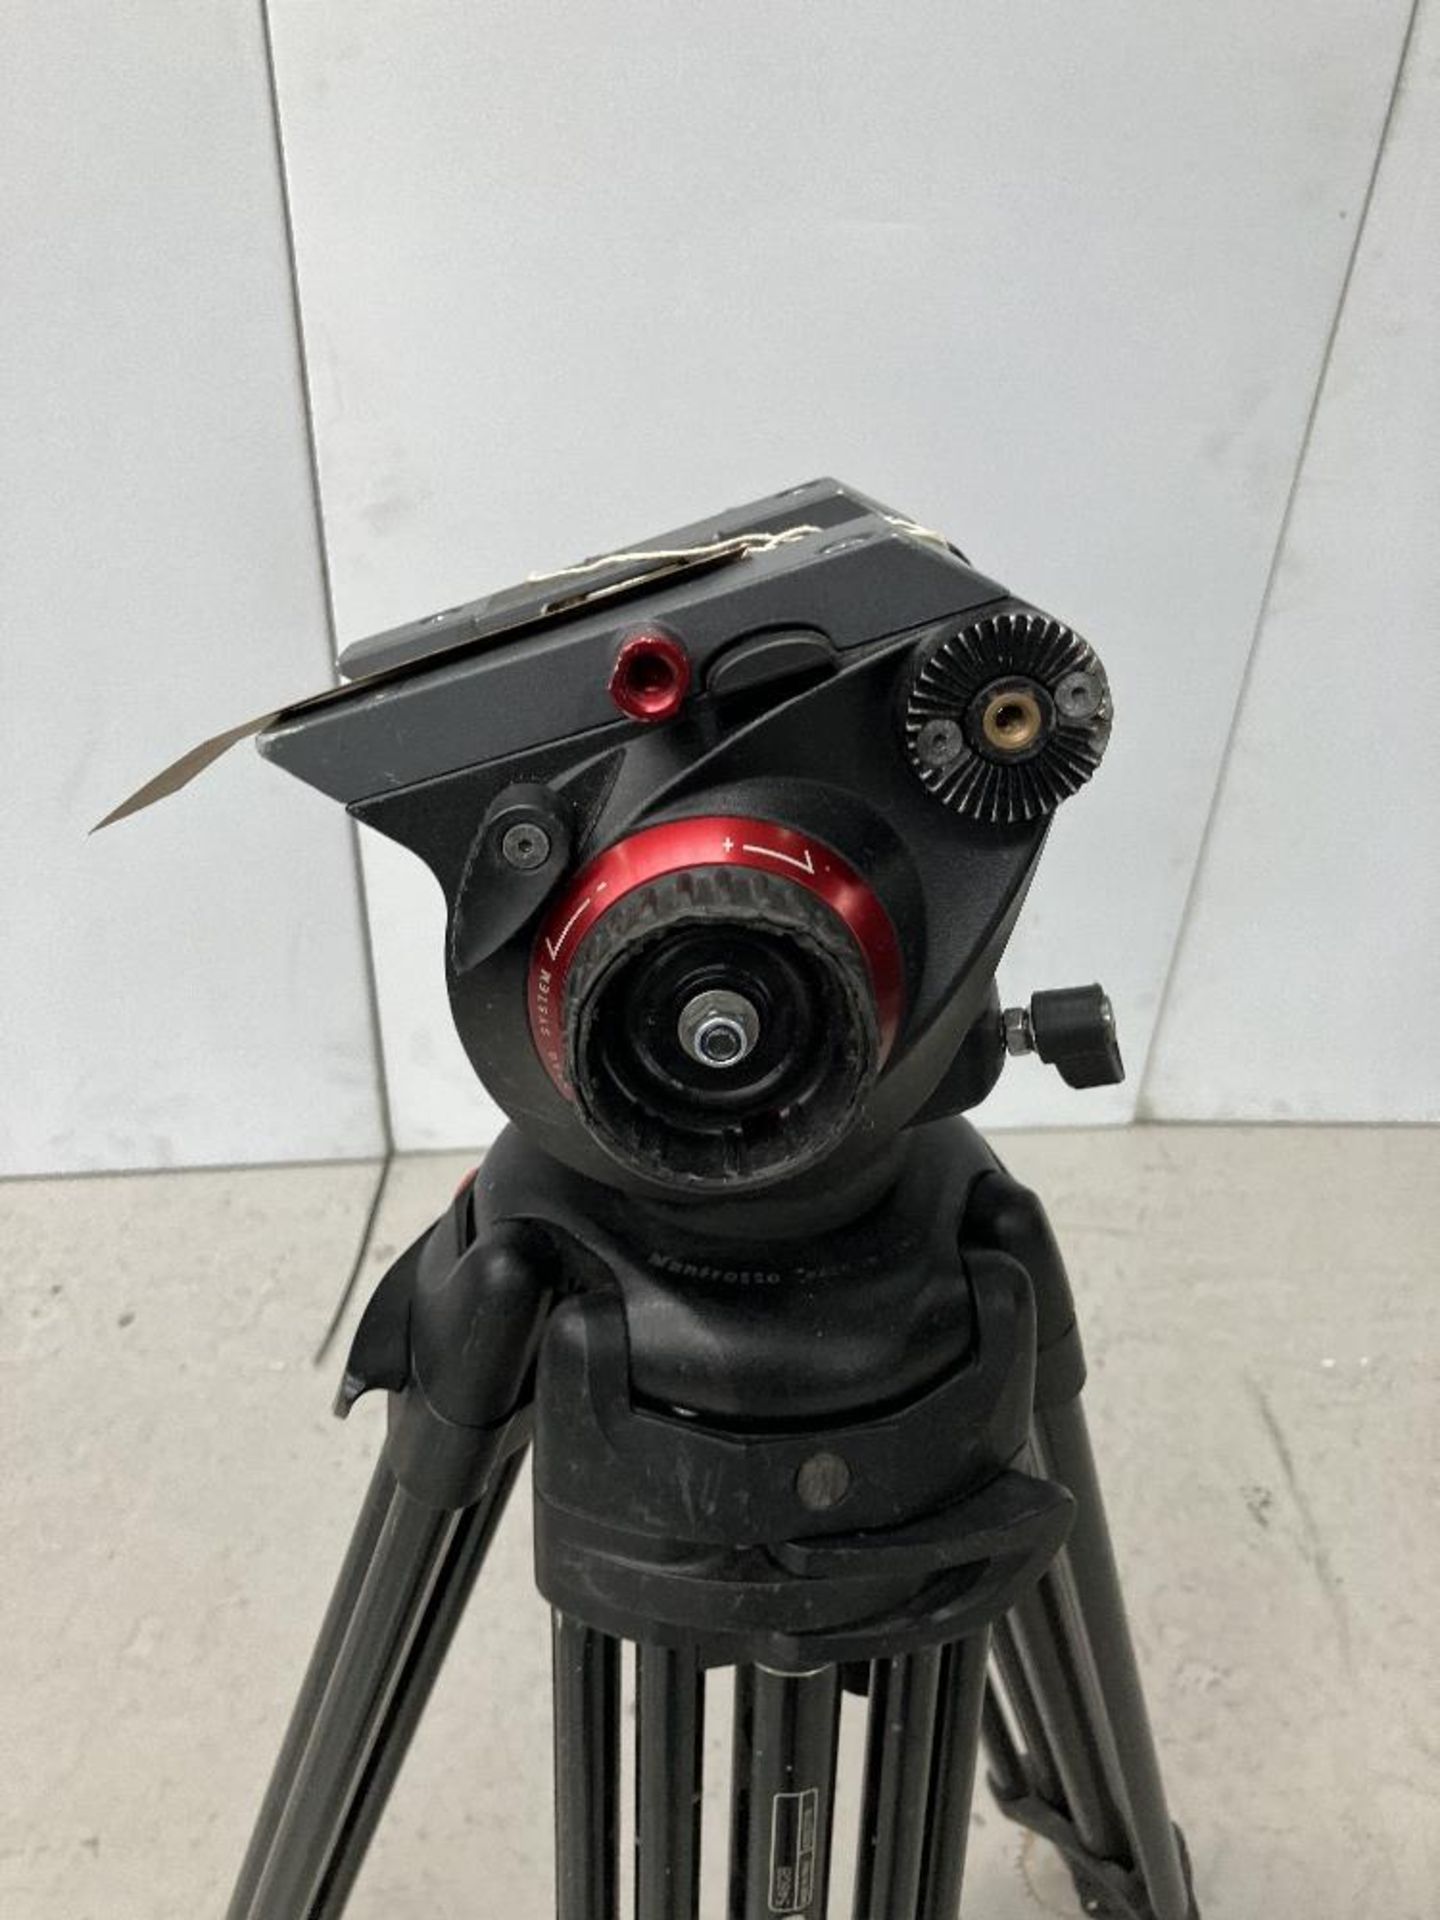 Manfrotto 504HD Tripod Head and 546GB Tripod with Carbon Fibre Legs - Image 4 of 4